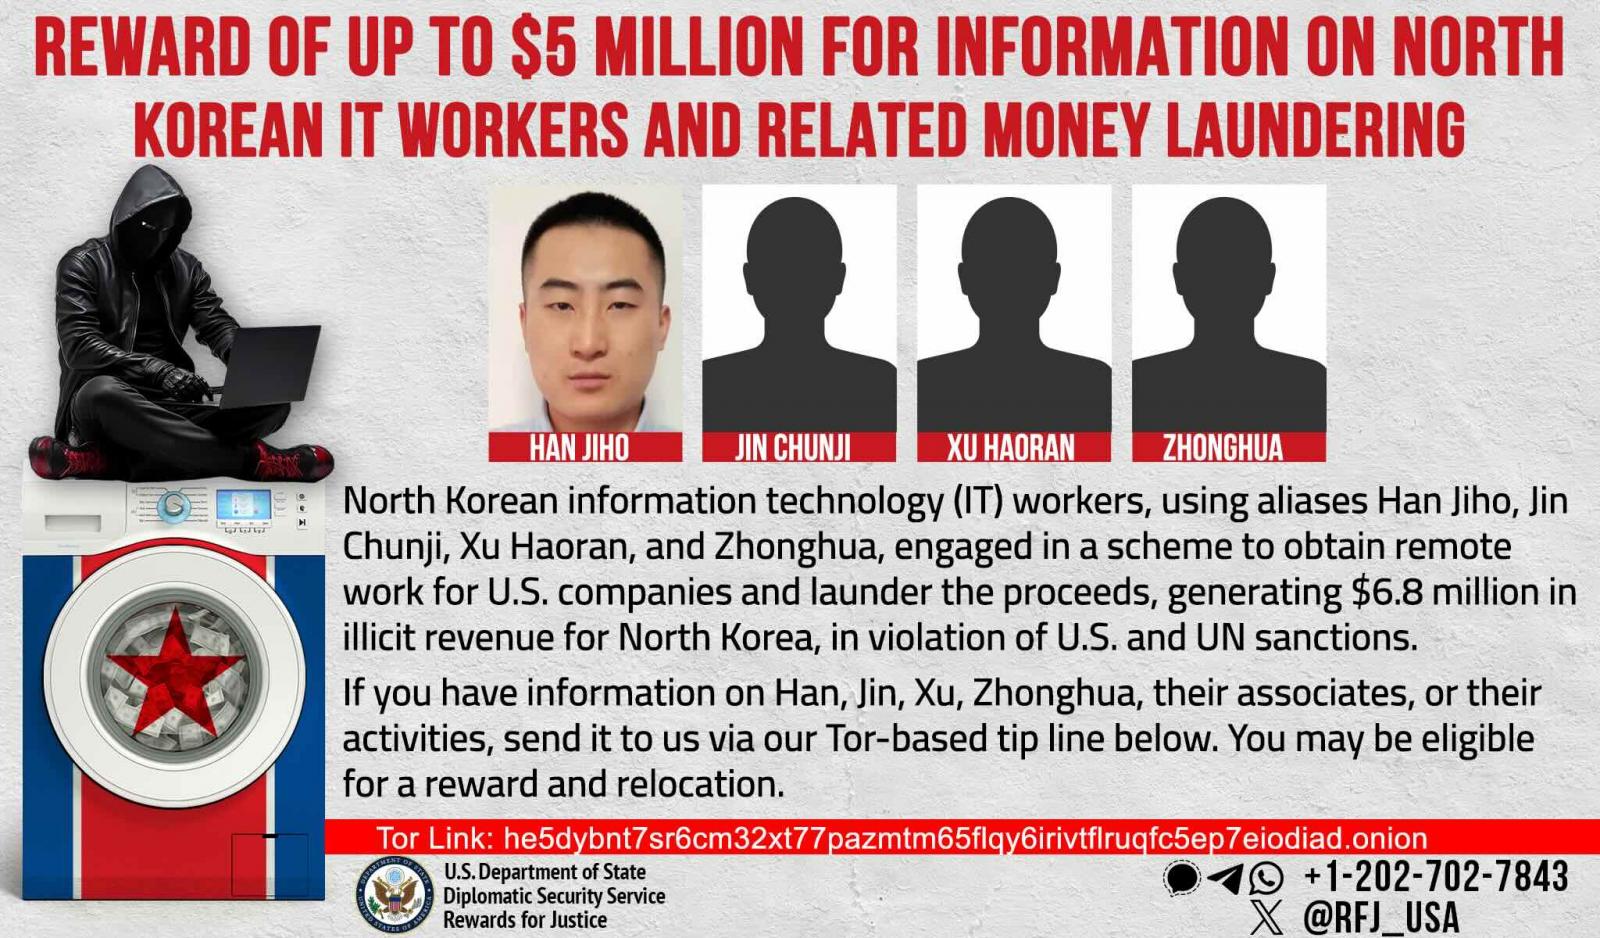 Reward for information on North Korean IT workers